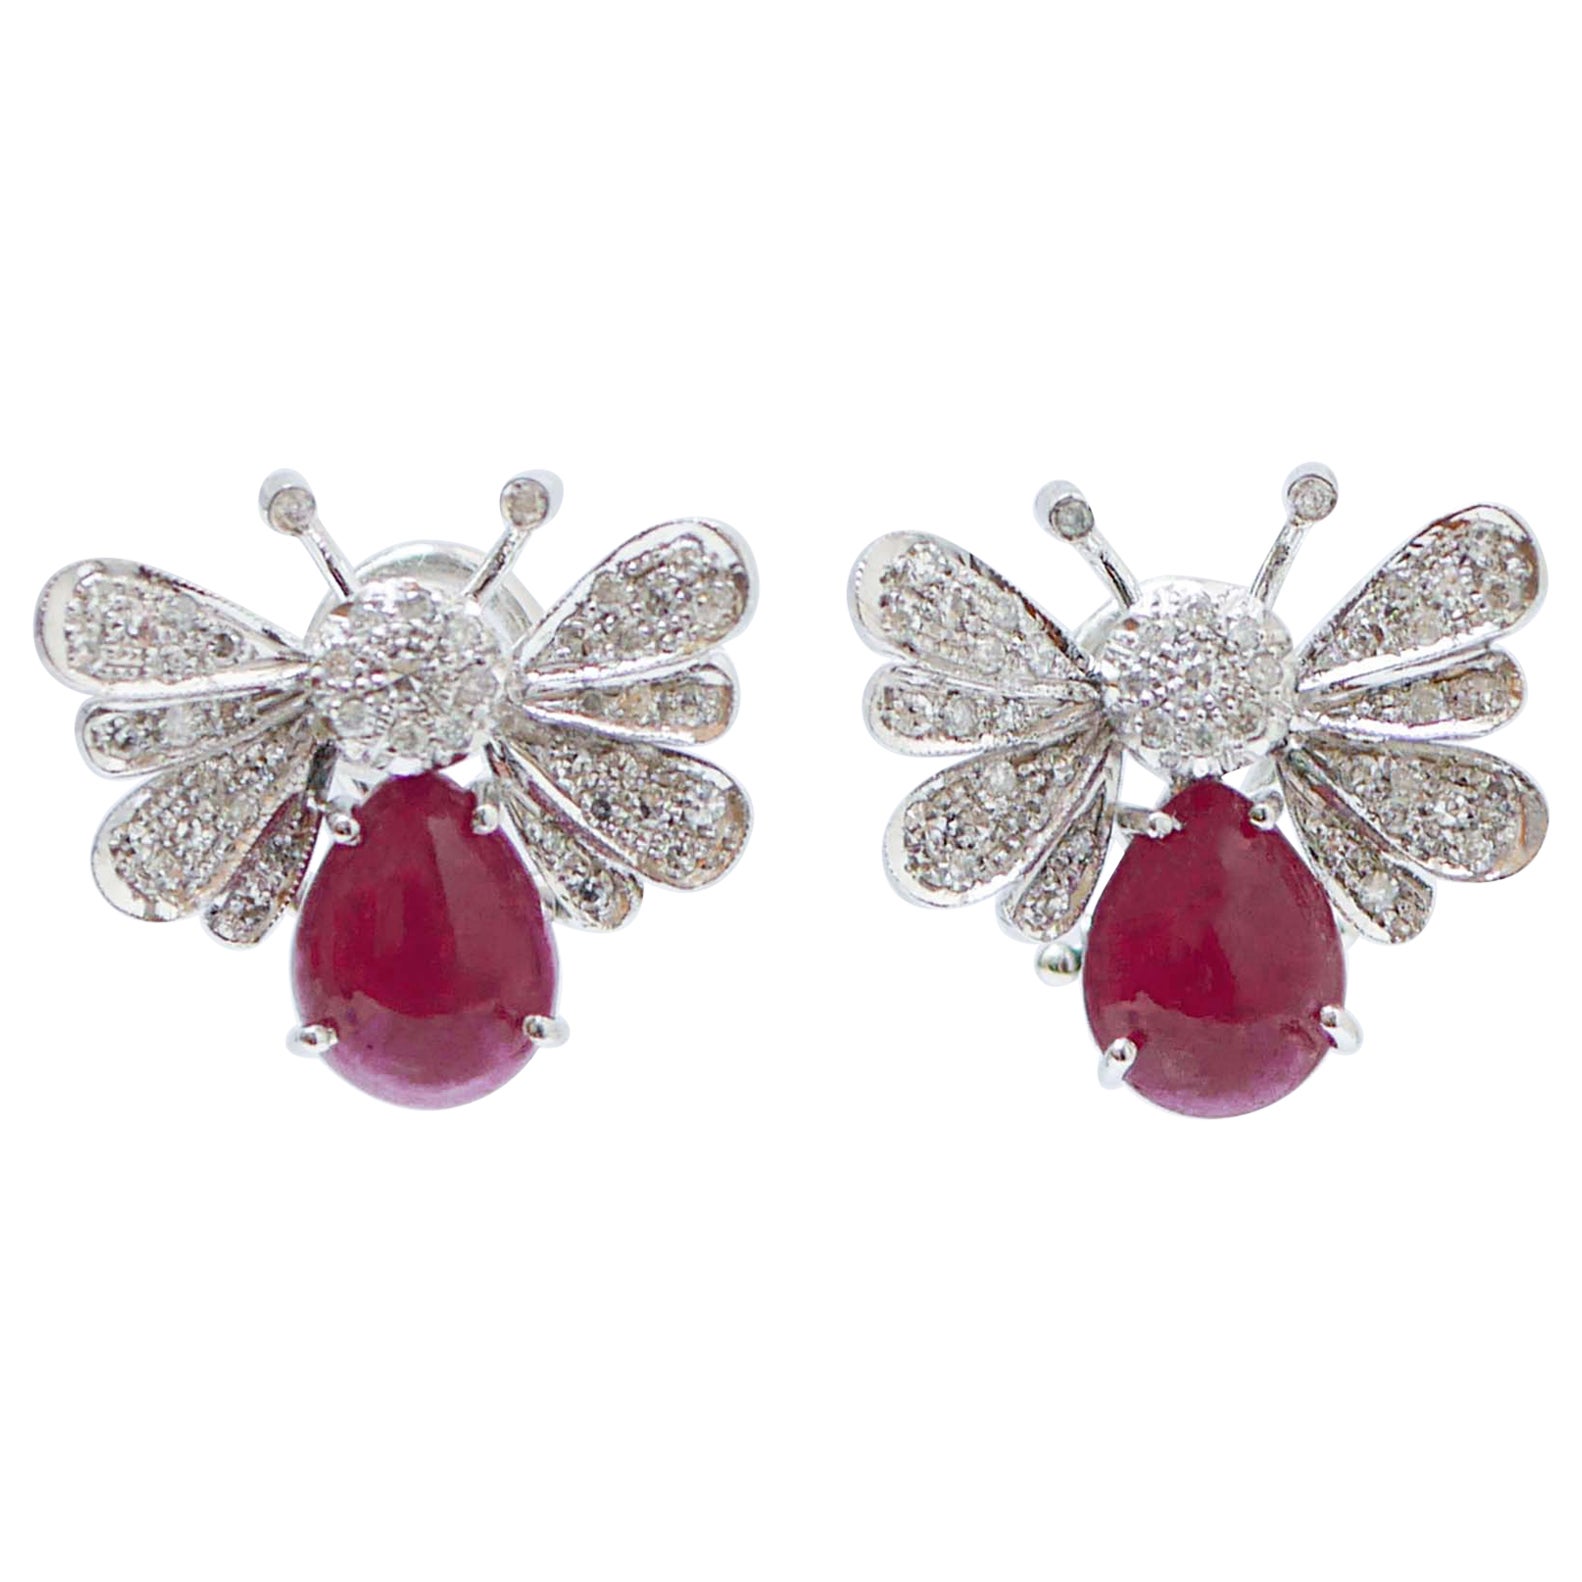 Rubies, Diamonds, Platinum and 14 Karat White Gold Butterfly Earrings. For Sale